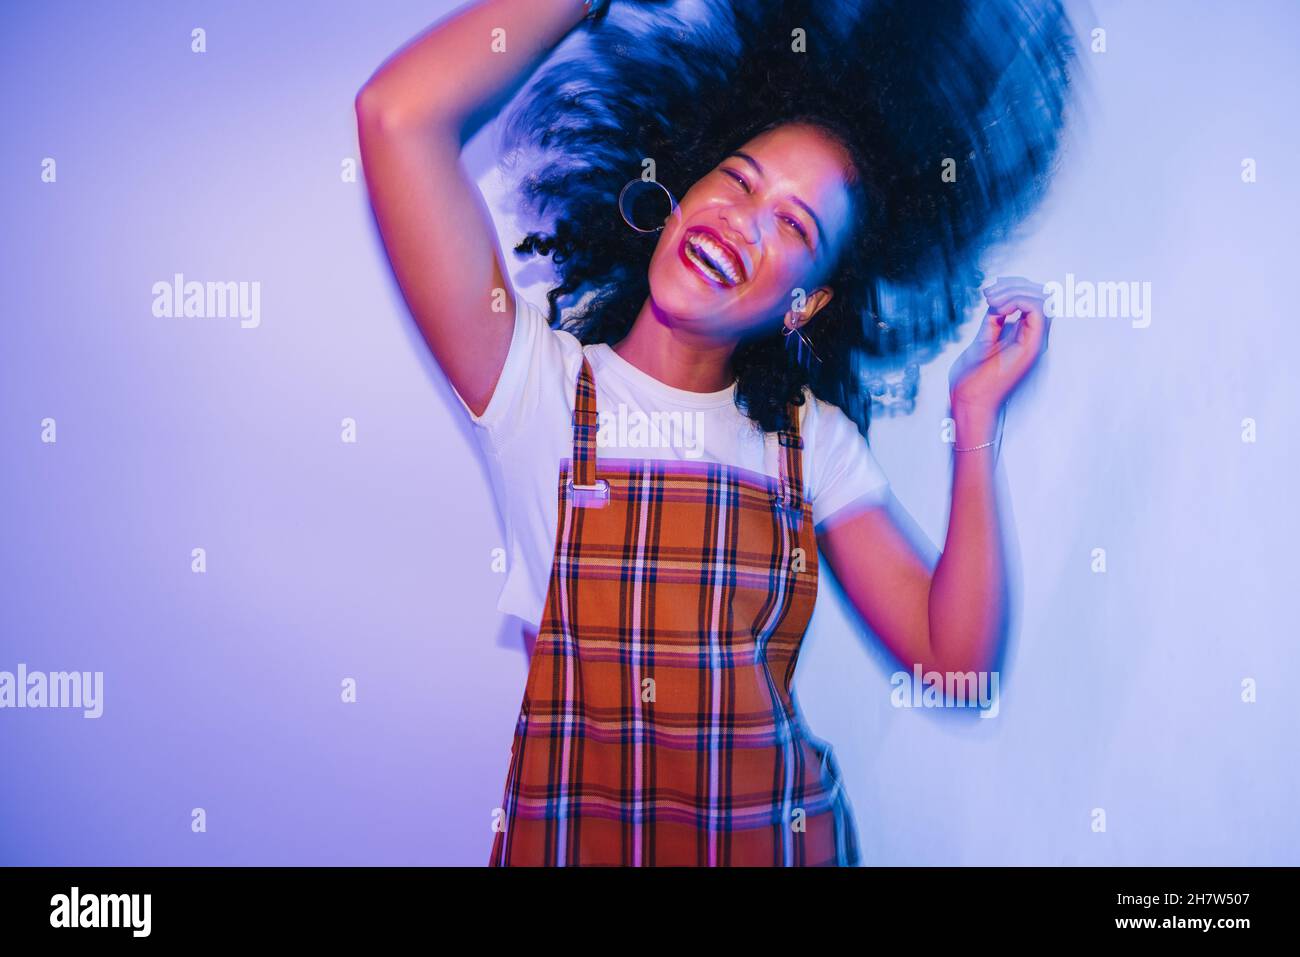 Energetic young woman dancing and whipping her hair happily. Cheerful young woman laughing joyfully while standing alone in bright neon light. Carefre Stock Photo